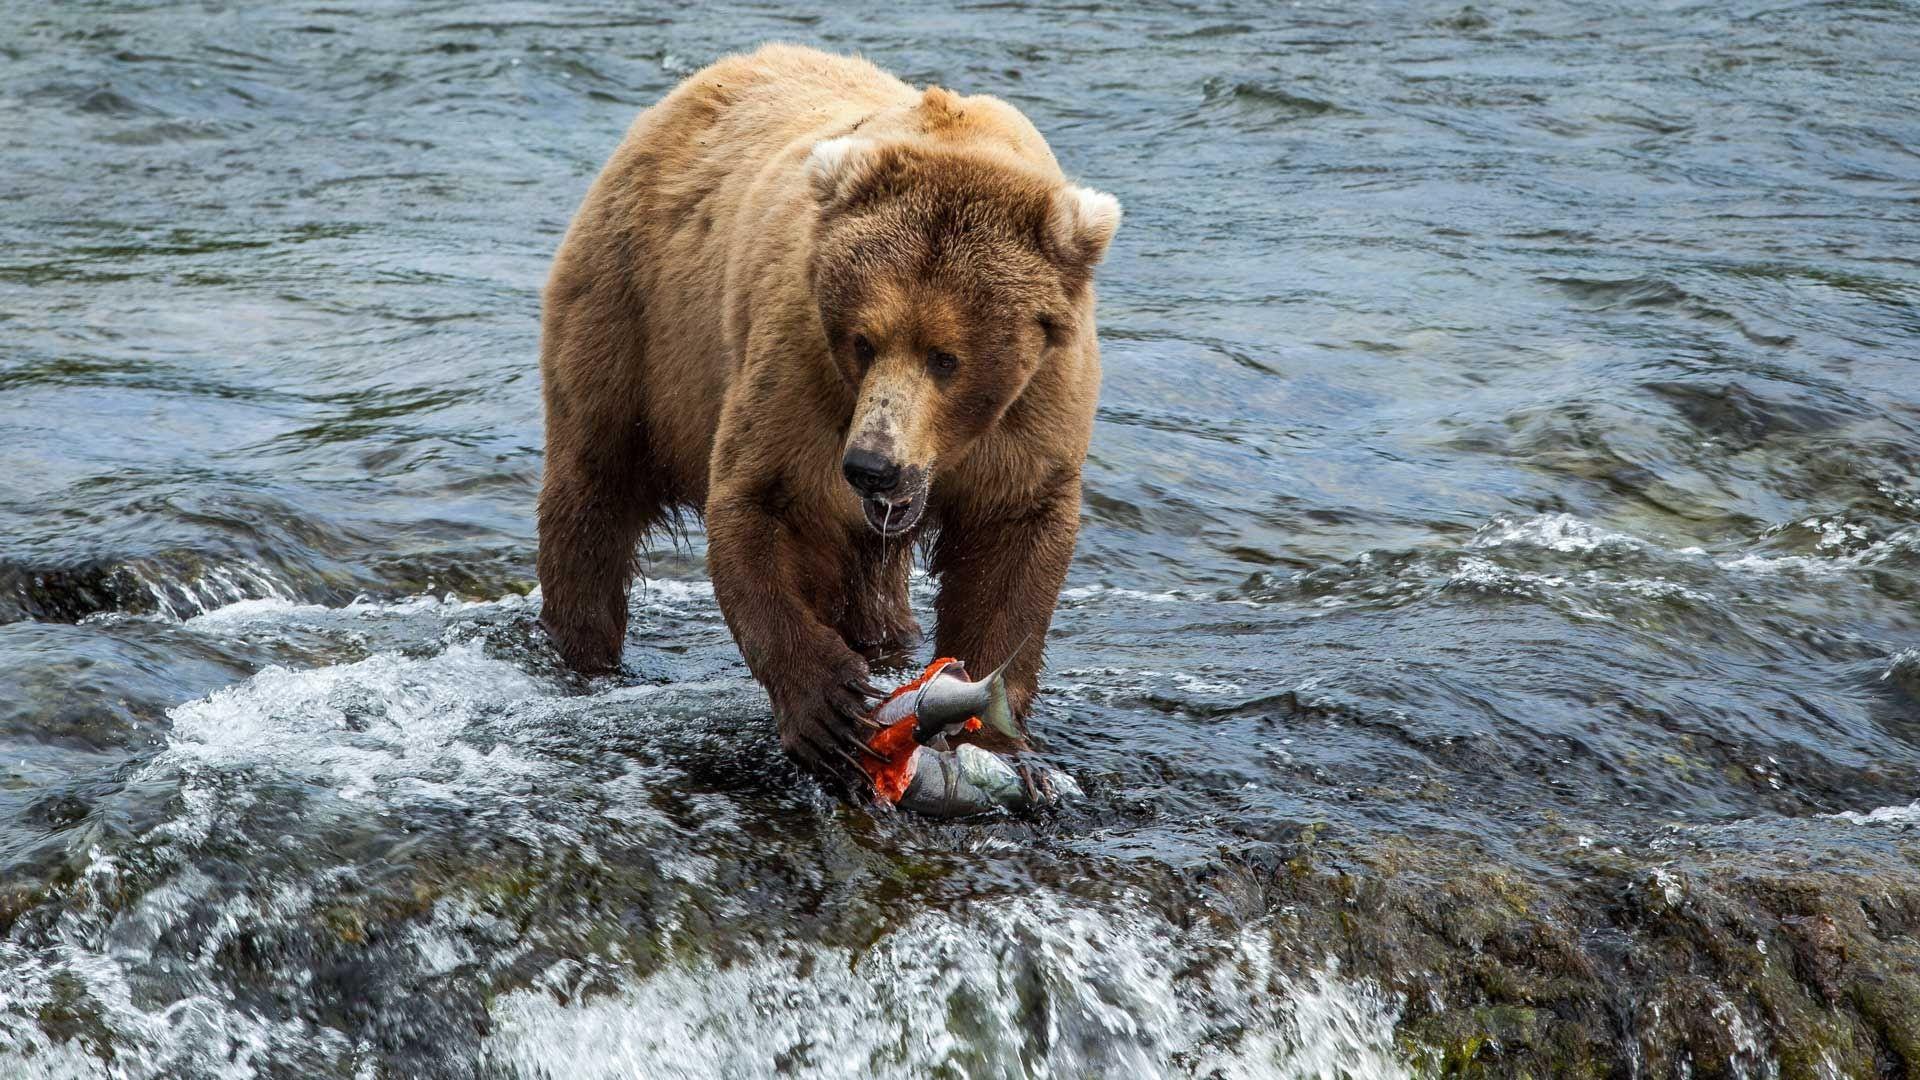 Brown bears feed at Brooks Falls in Katmai National Park and